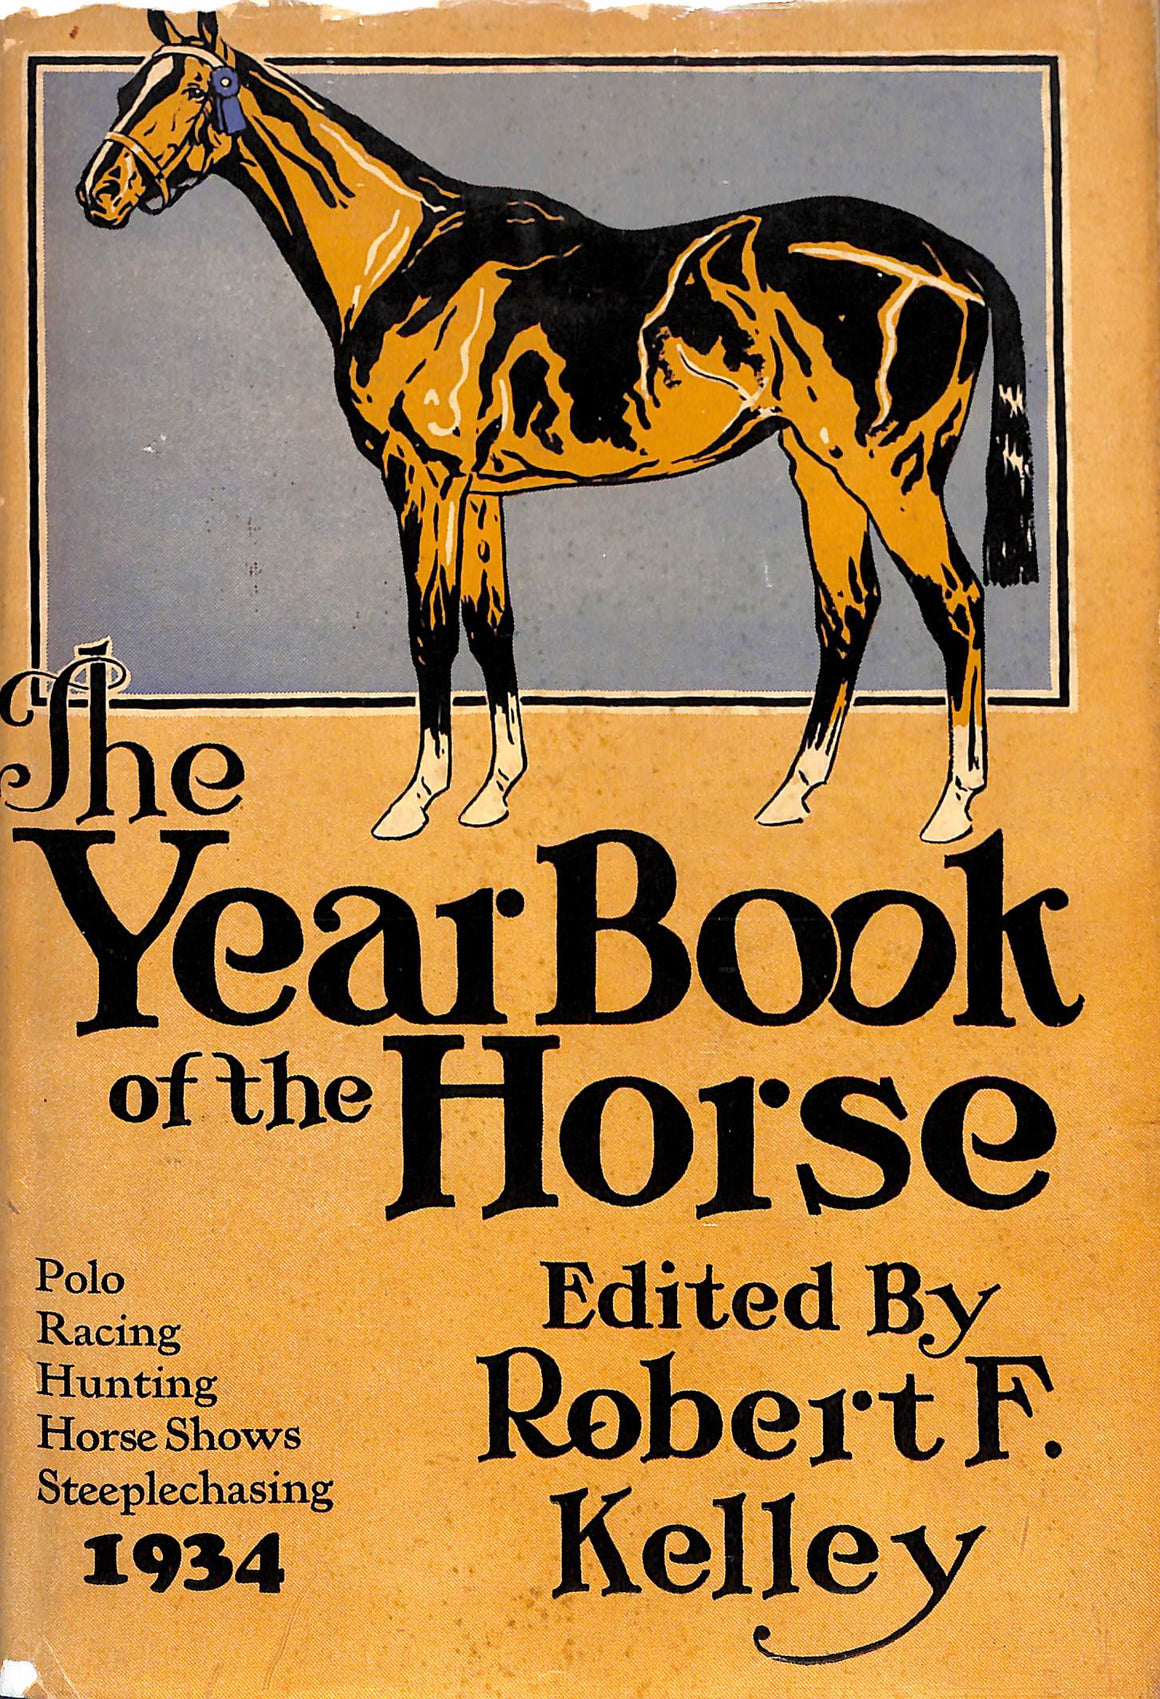 The Year Book of The Horse